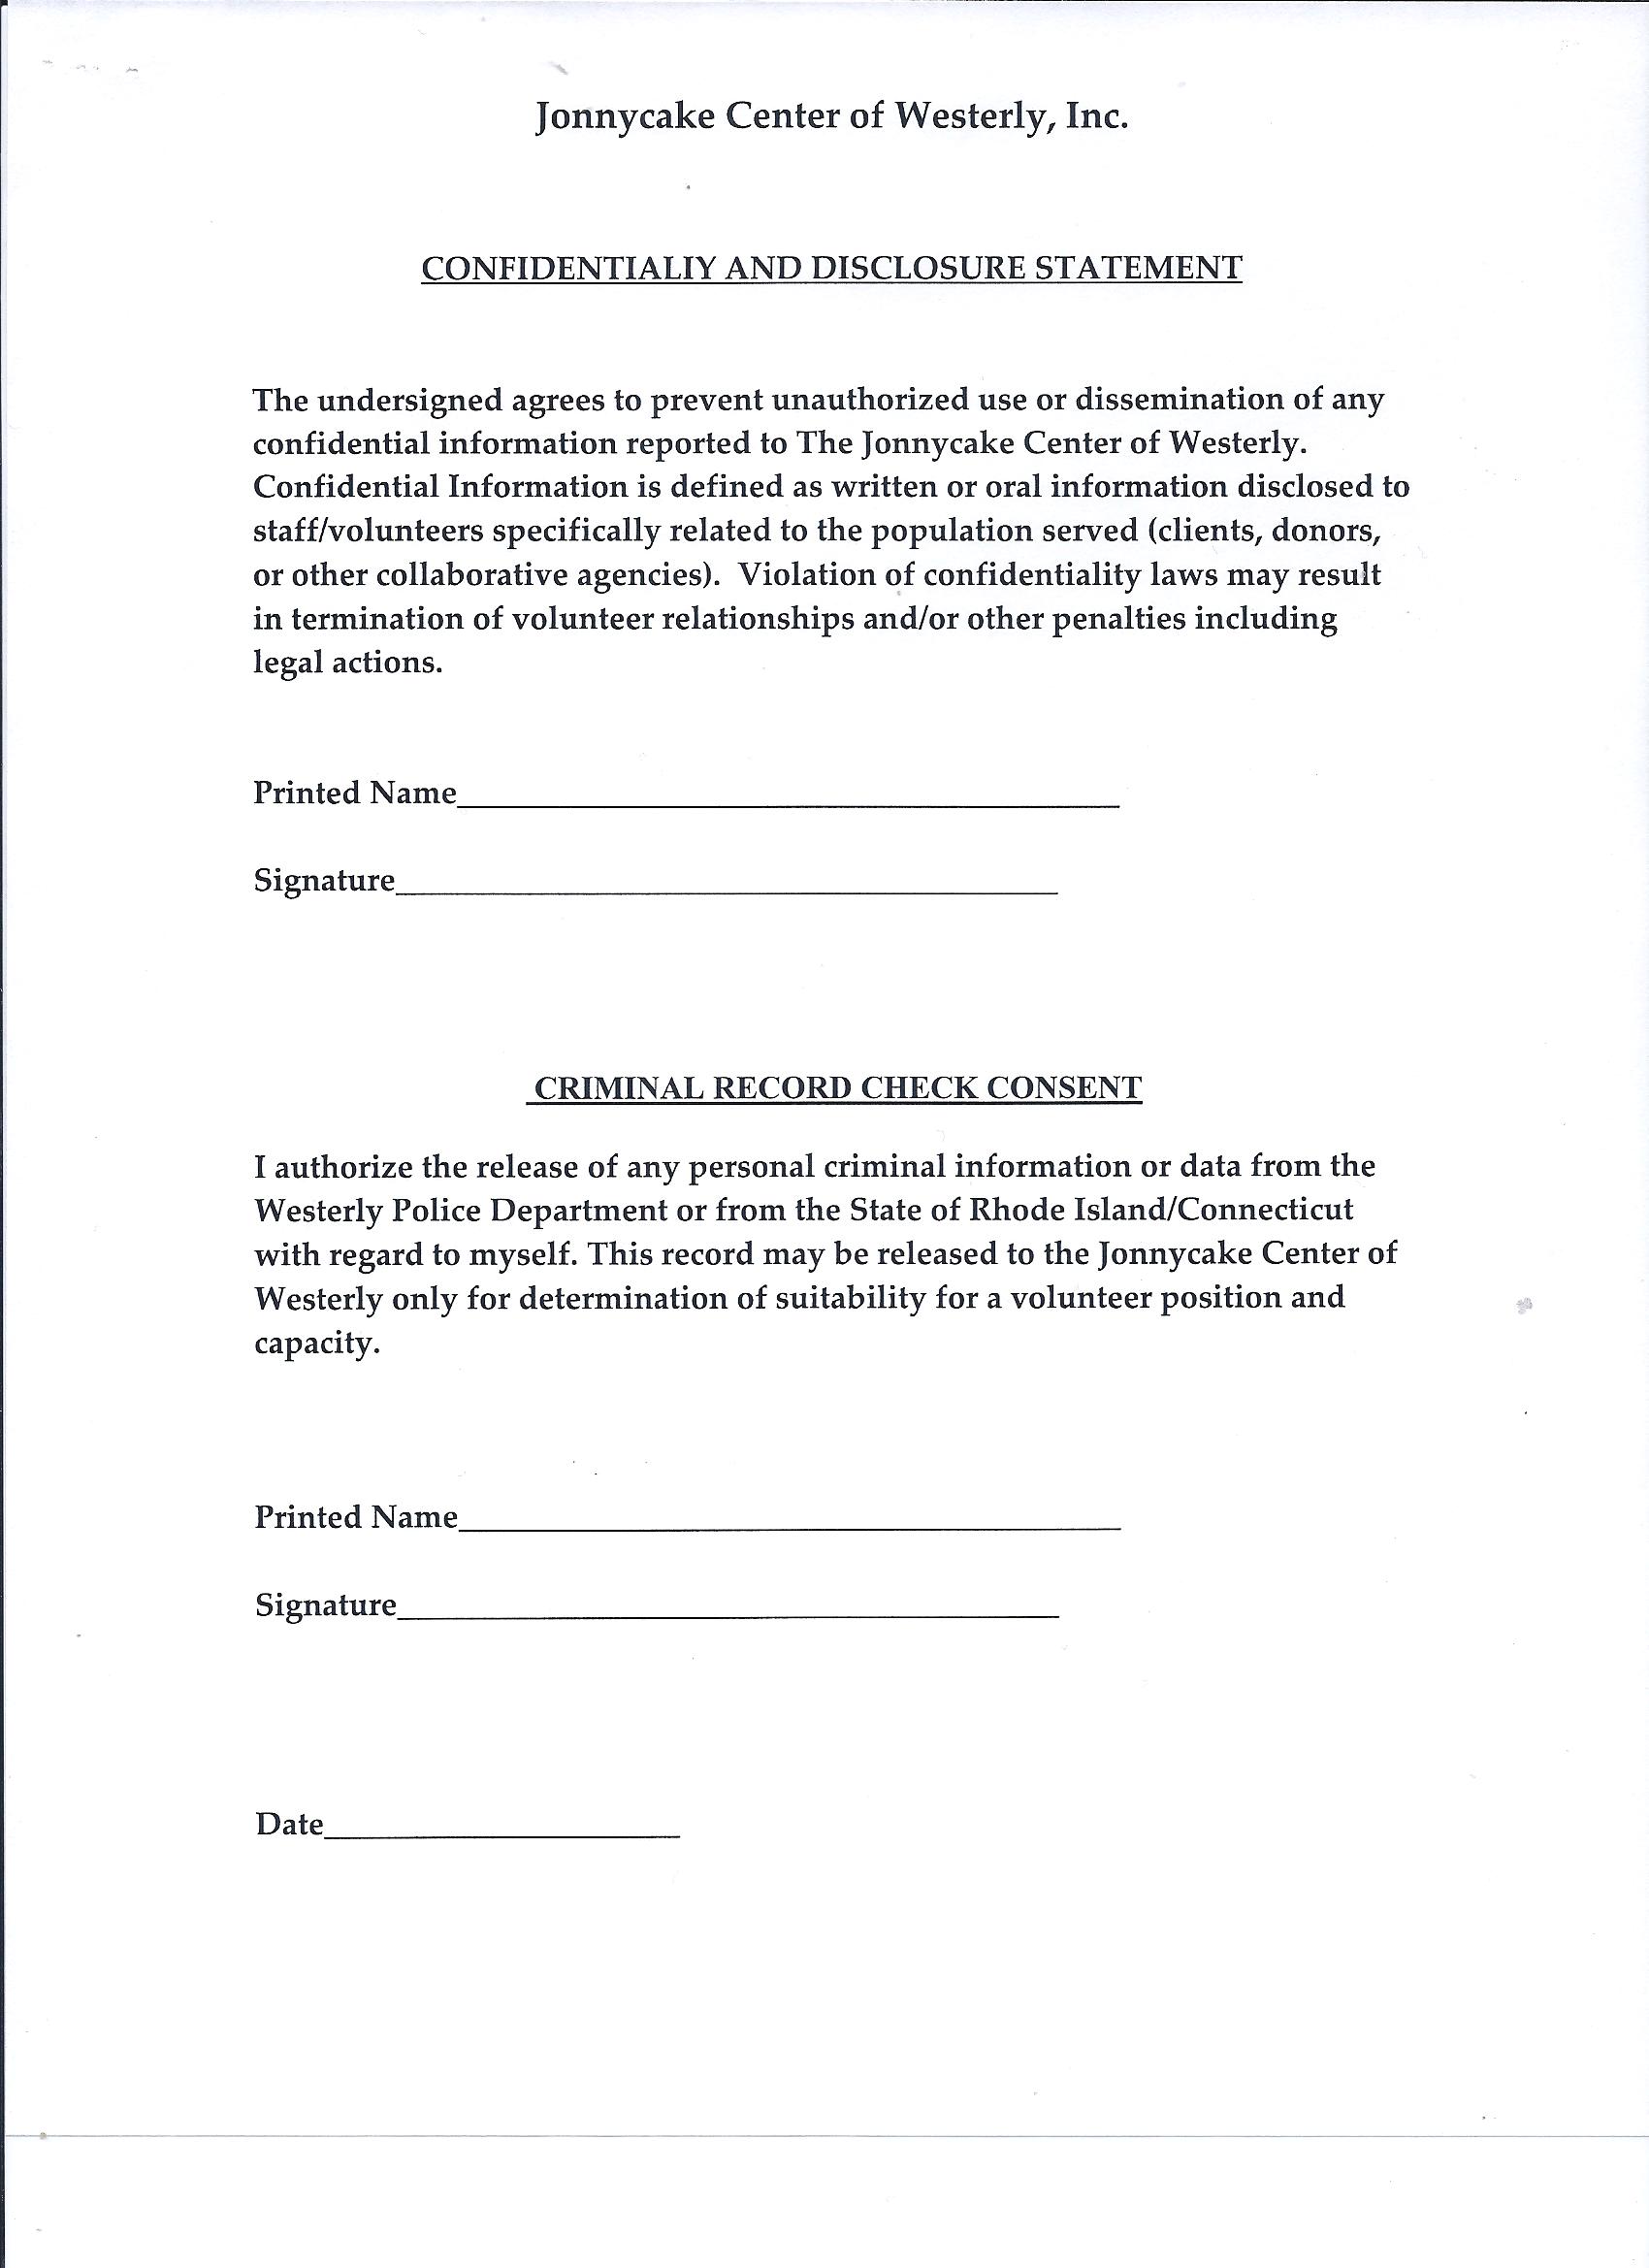 Confidentiality Agreement Forms Free Printable Documents